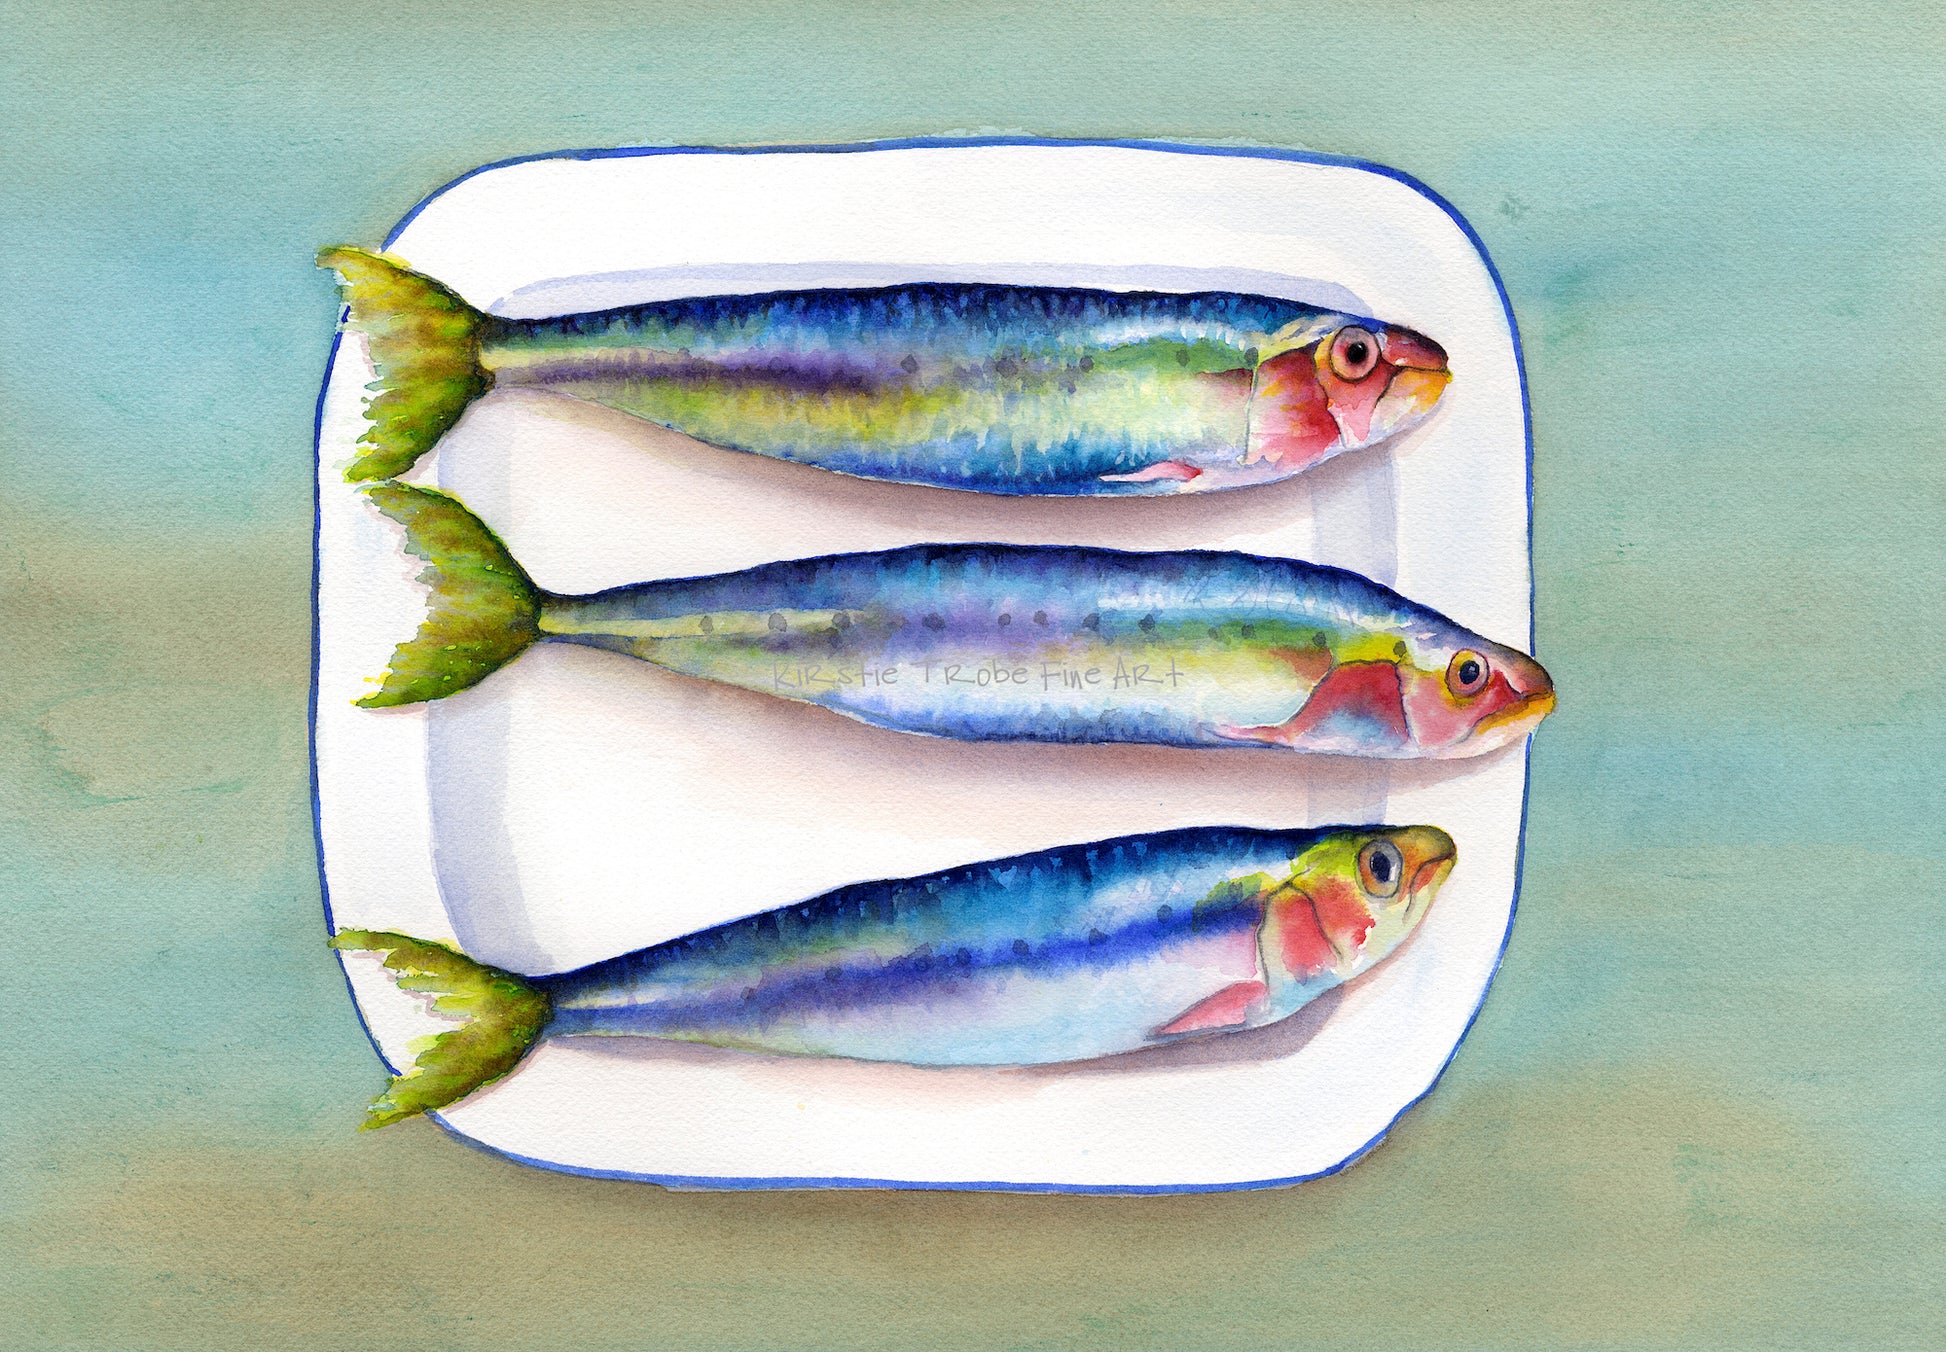 Three colourful Sardines lie on a white enamel plate that has a blue border with a green/brown background beneath it. They face to the right and their shiny scales are painted in a rainbow of colours.